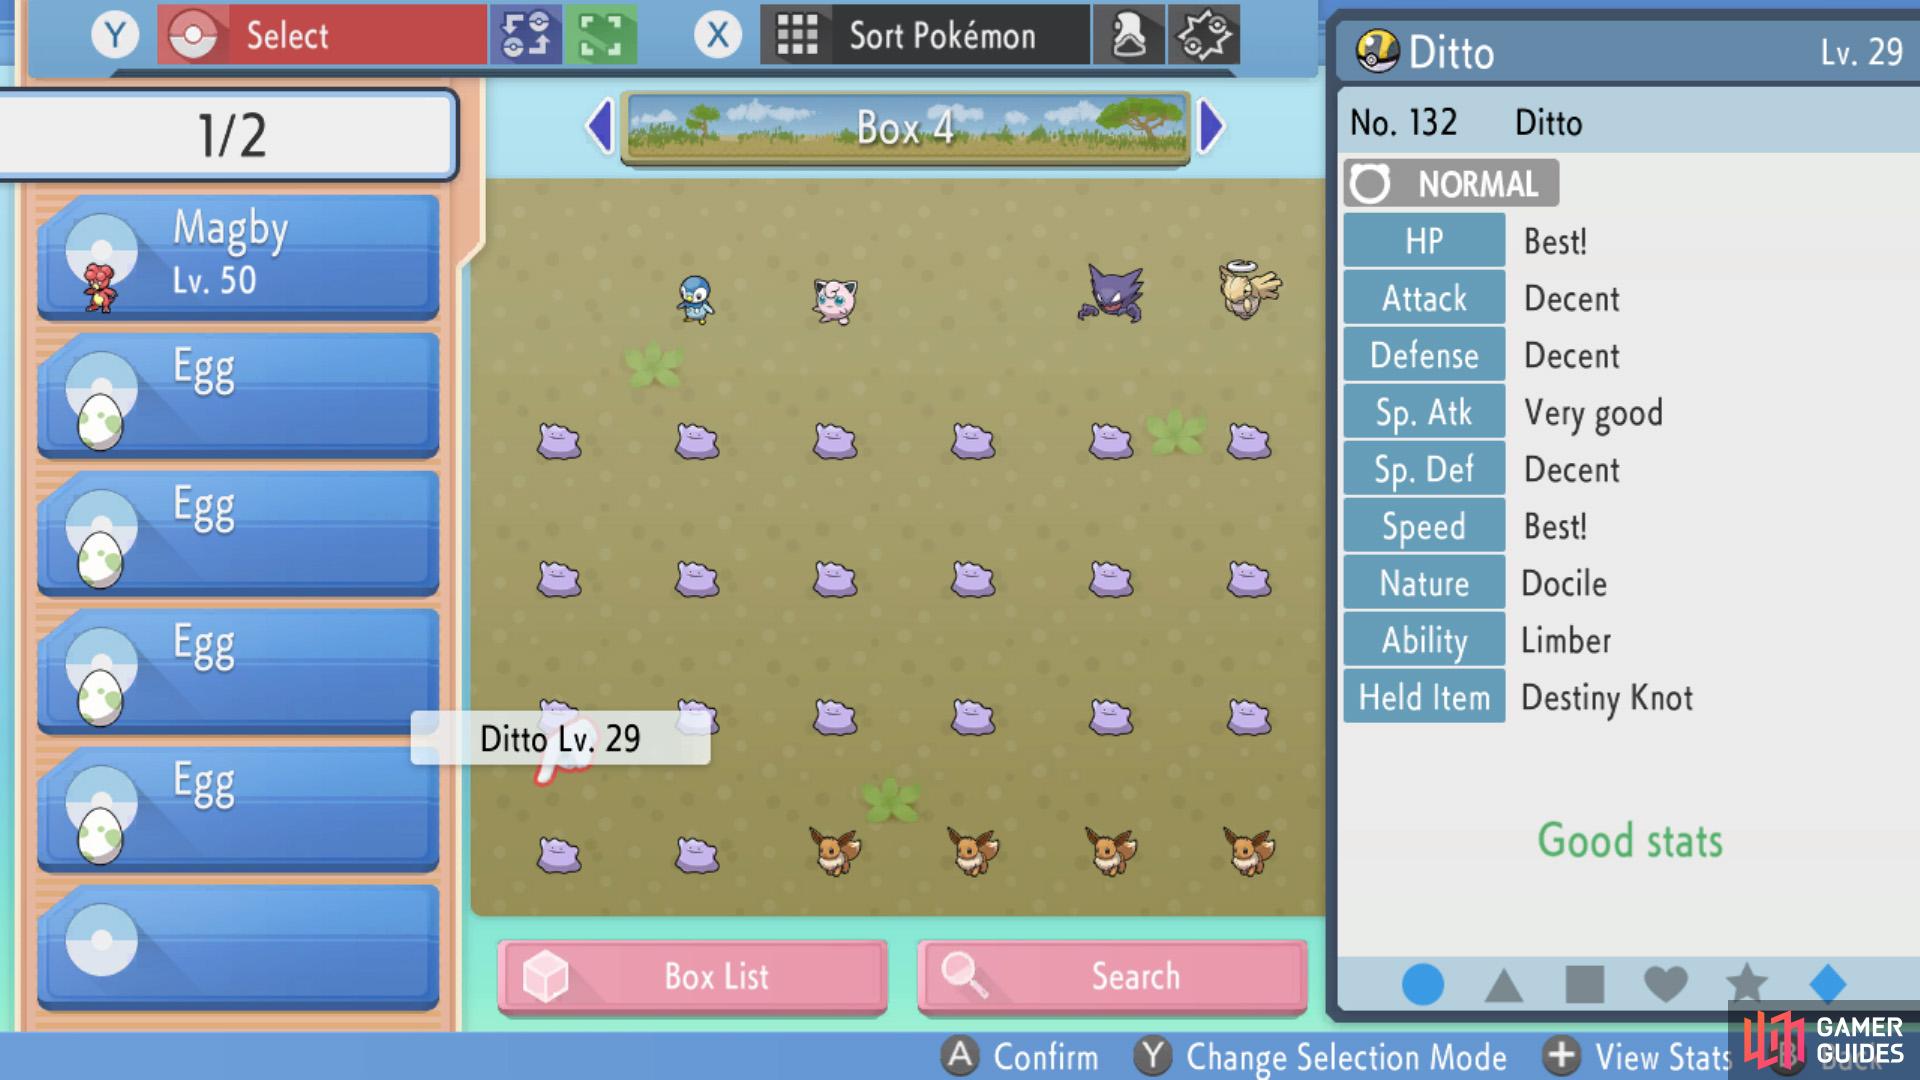 It'll be breeding with a Ditto that has 2 perfect IVs.